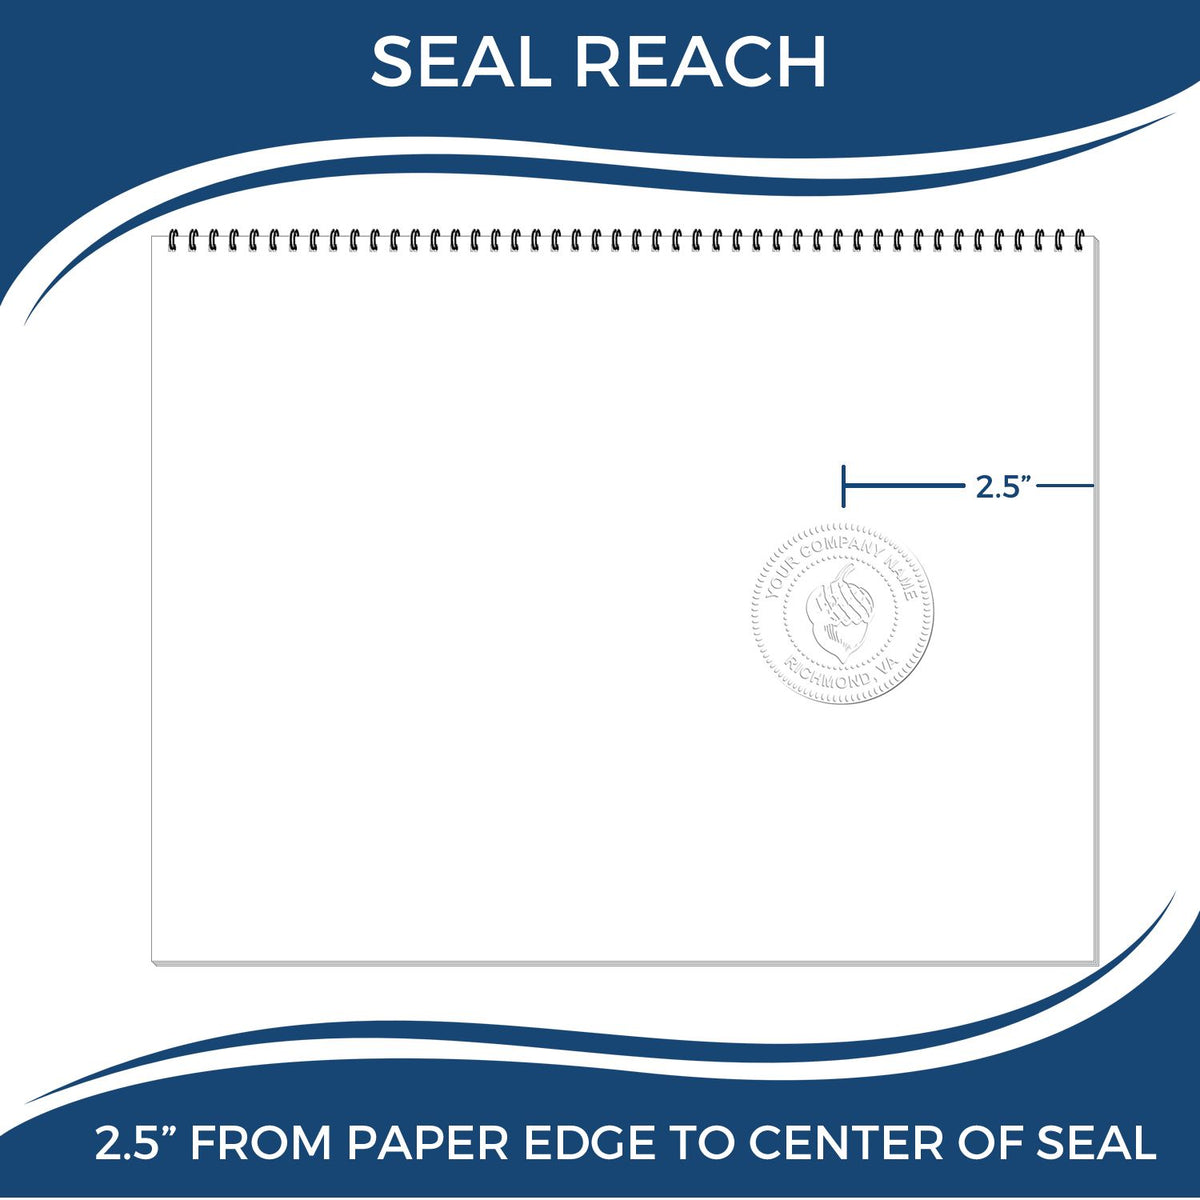 An infographic showing the seal reach which is represented by a ruler and a miniature seal image of the Heavy Duty Cast Iron Colorado Architect Embosser